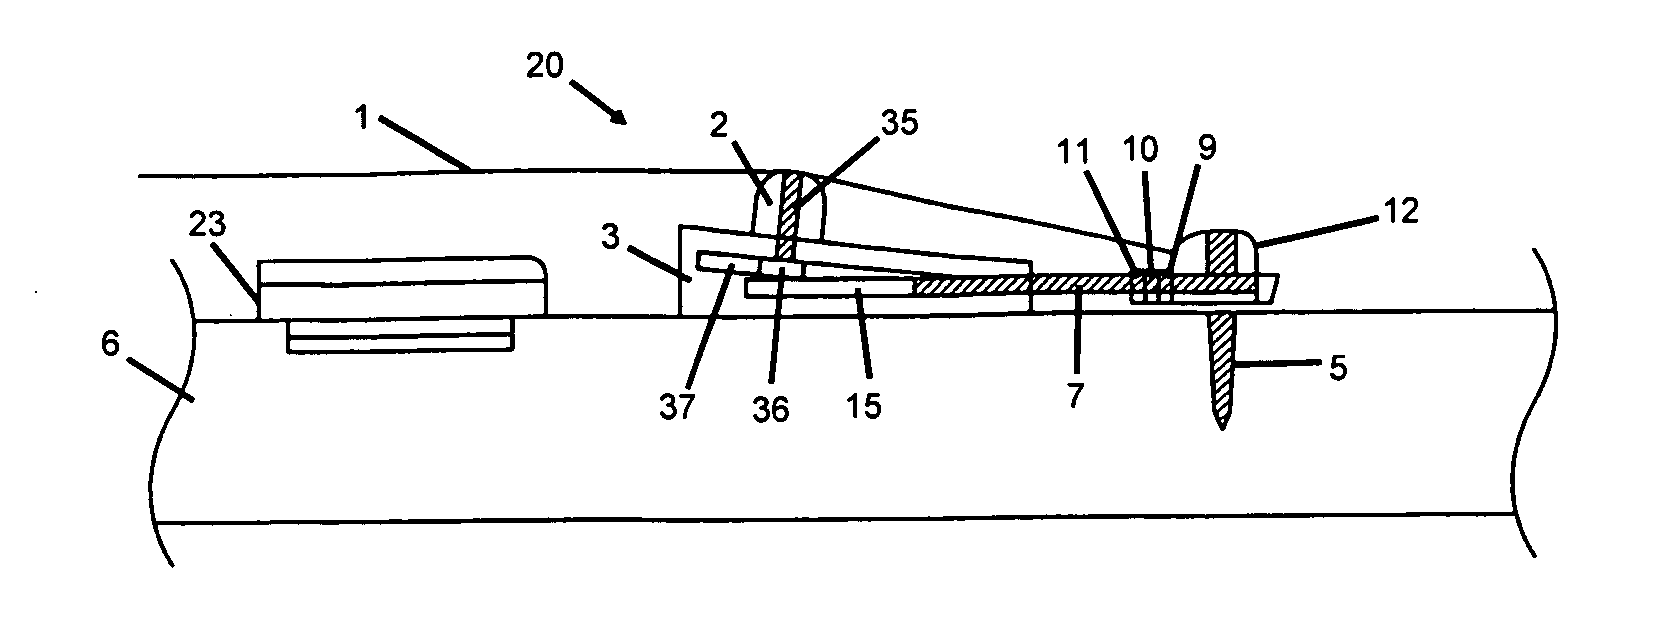 Bridge system for improved acoustic coupling in stringed instruments